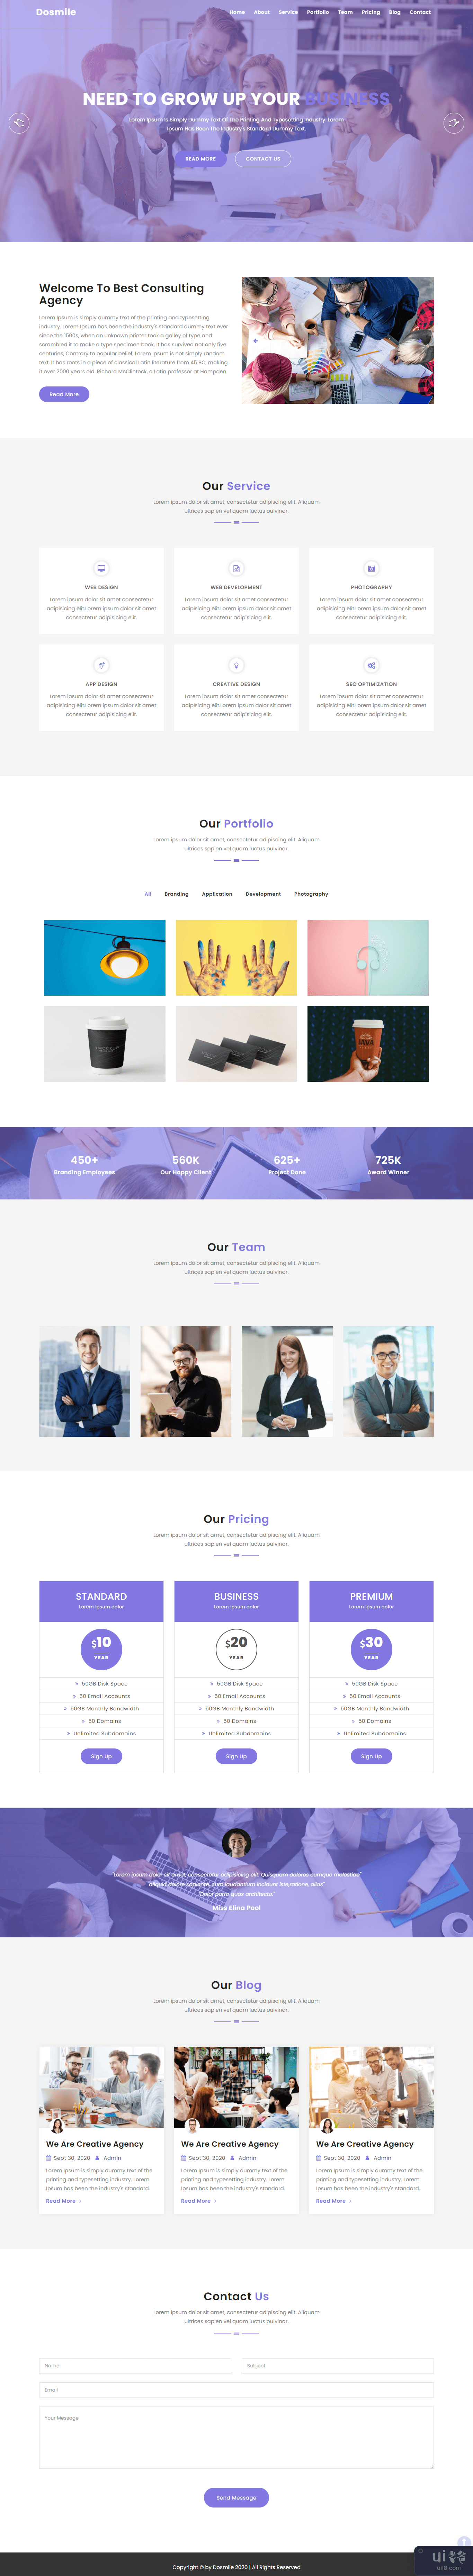 Dosmile 咨询和商务 HTML5 模板(Dosmile Consulting & Business HTML5 Template)插图